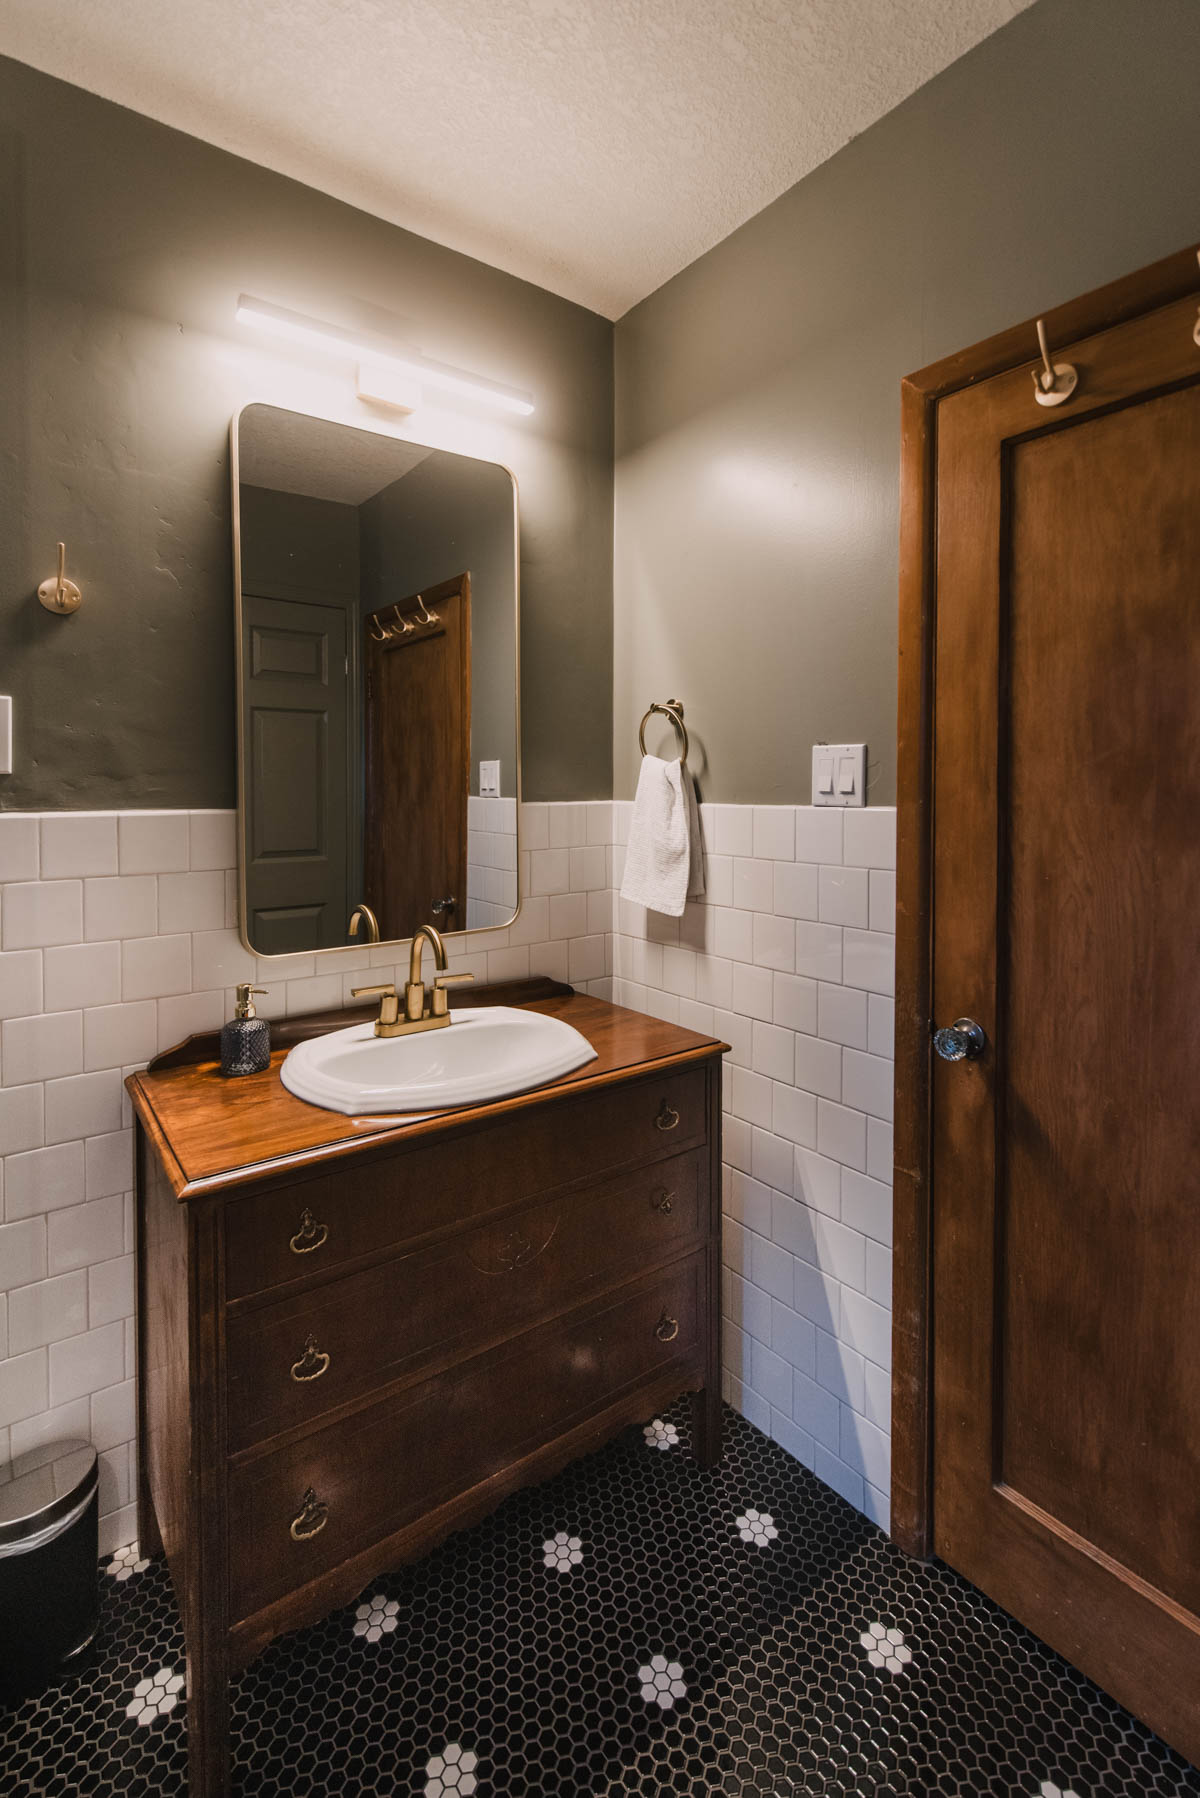 Classic Black and White tile in a green bathroom with wood vanity and trim